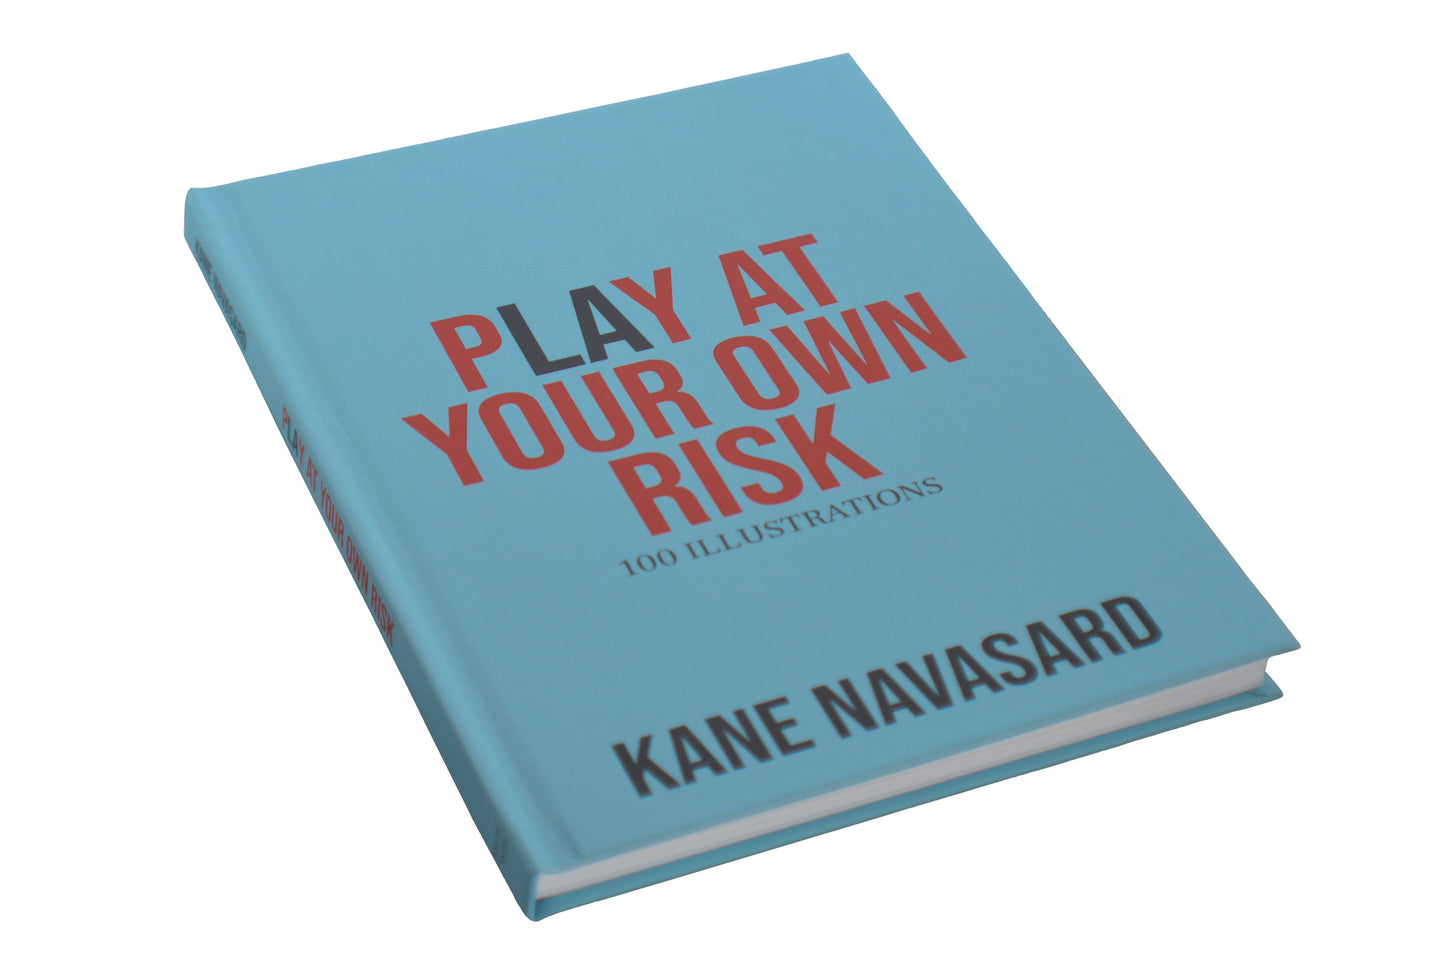 PLAY AT YOUR OWN RISK BOOK